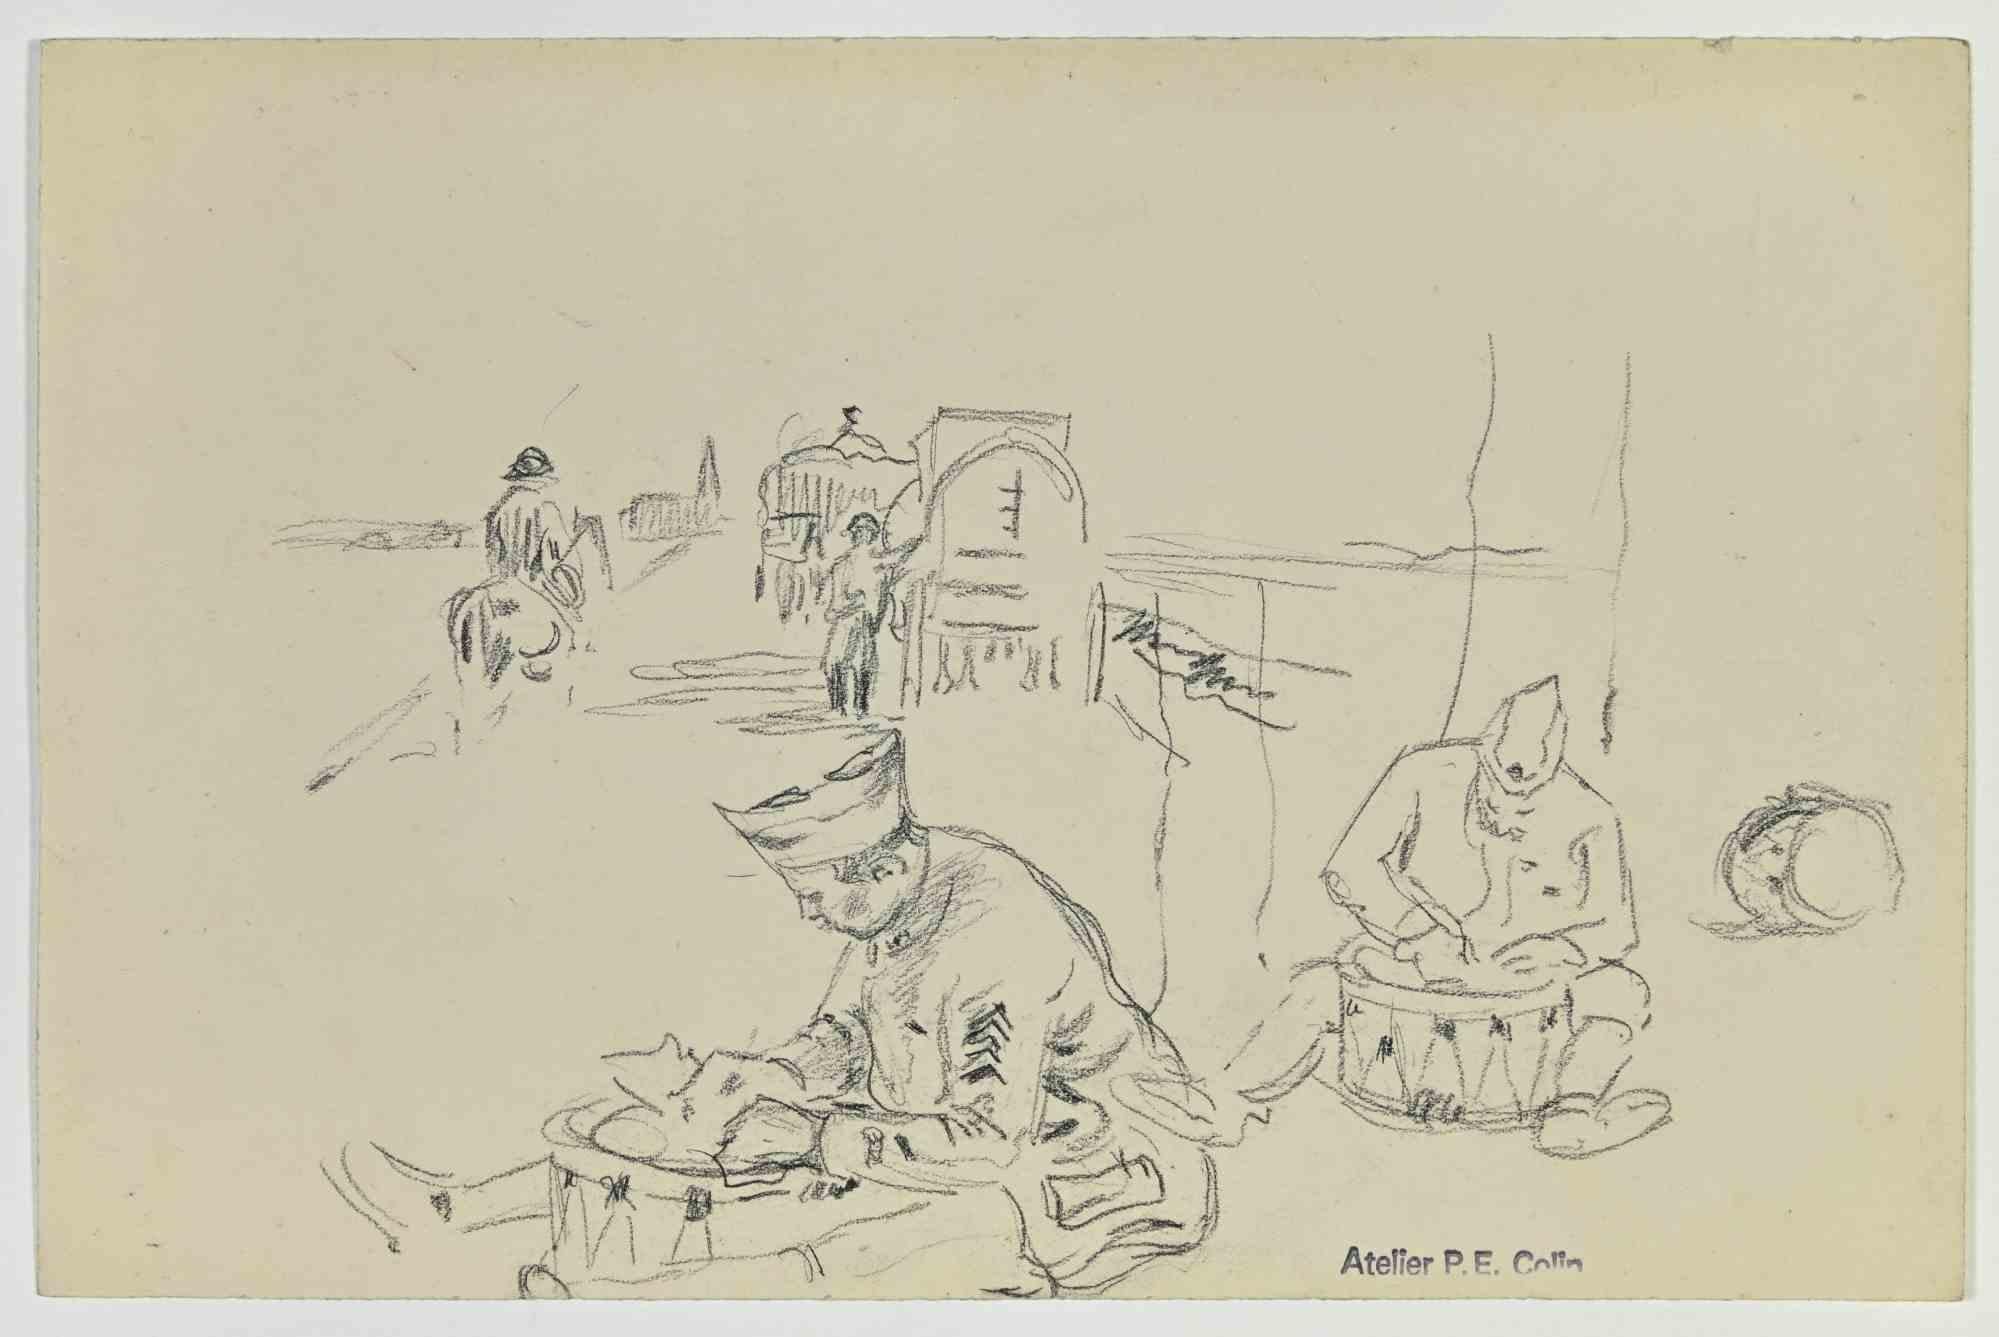 Soldiers Preparation is a drawing realized by Paul Emile Colin in the Early 20th Century.

Carbon Pencil on ivory-colored paper

Stamped on the lower.

Good conditions with slight foxing.

The artwork is realized through deft expressive strokes.